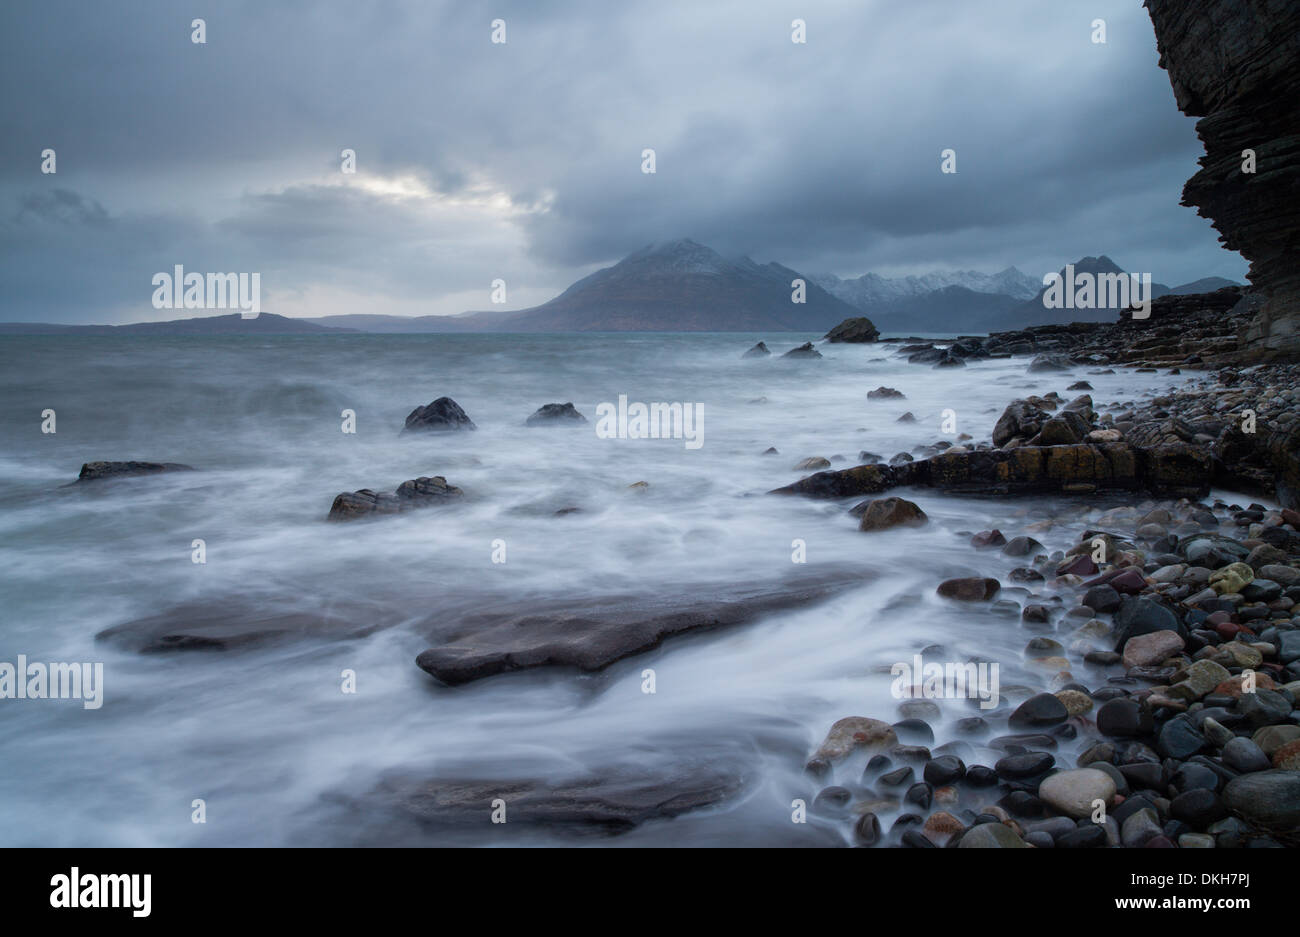 Stormy conditions at Elgol, Isle of Skye, Scotland, United Kingdom, Europe Stock Photo